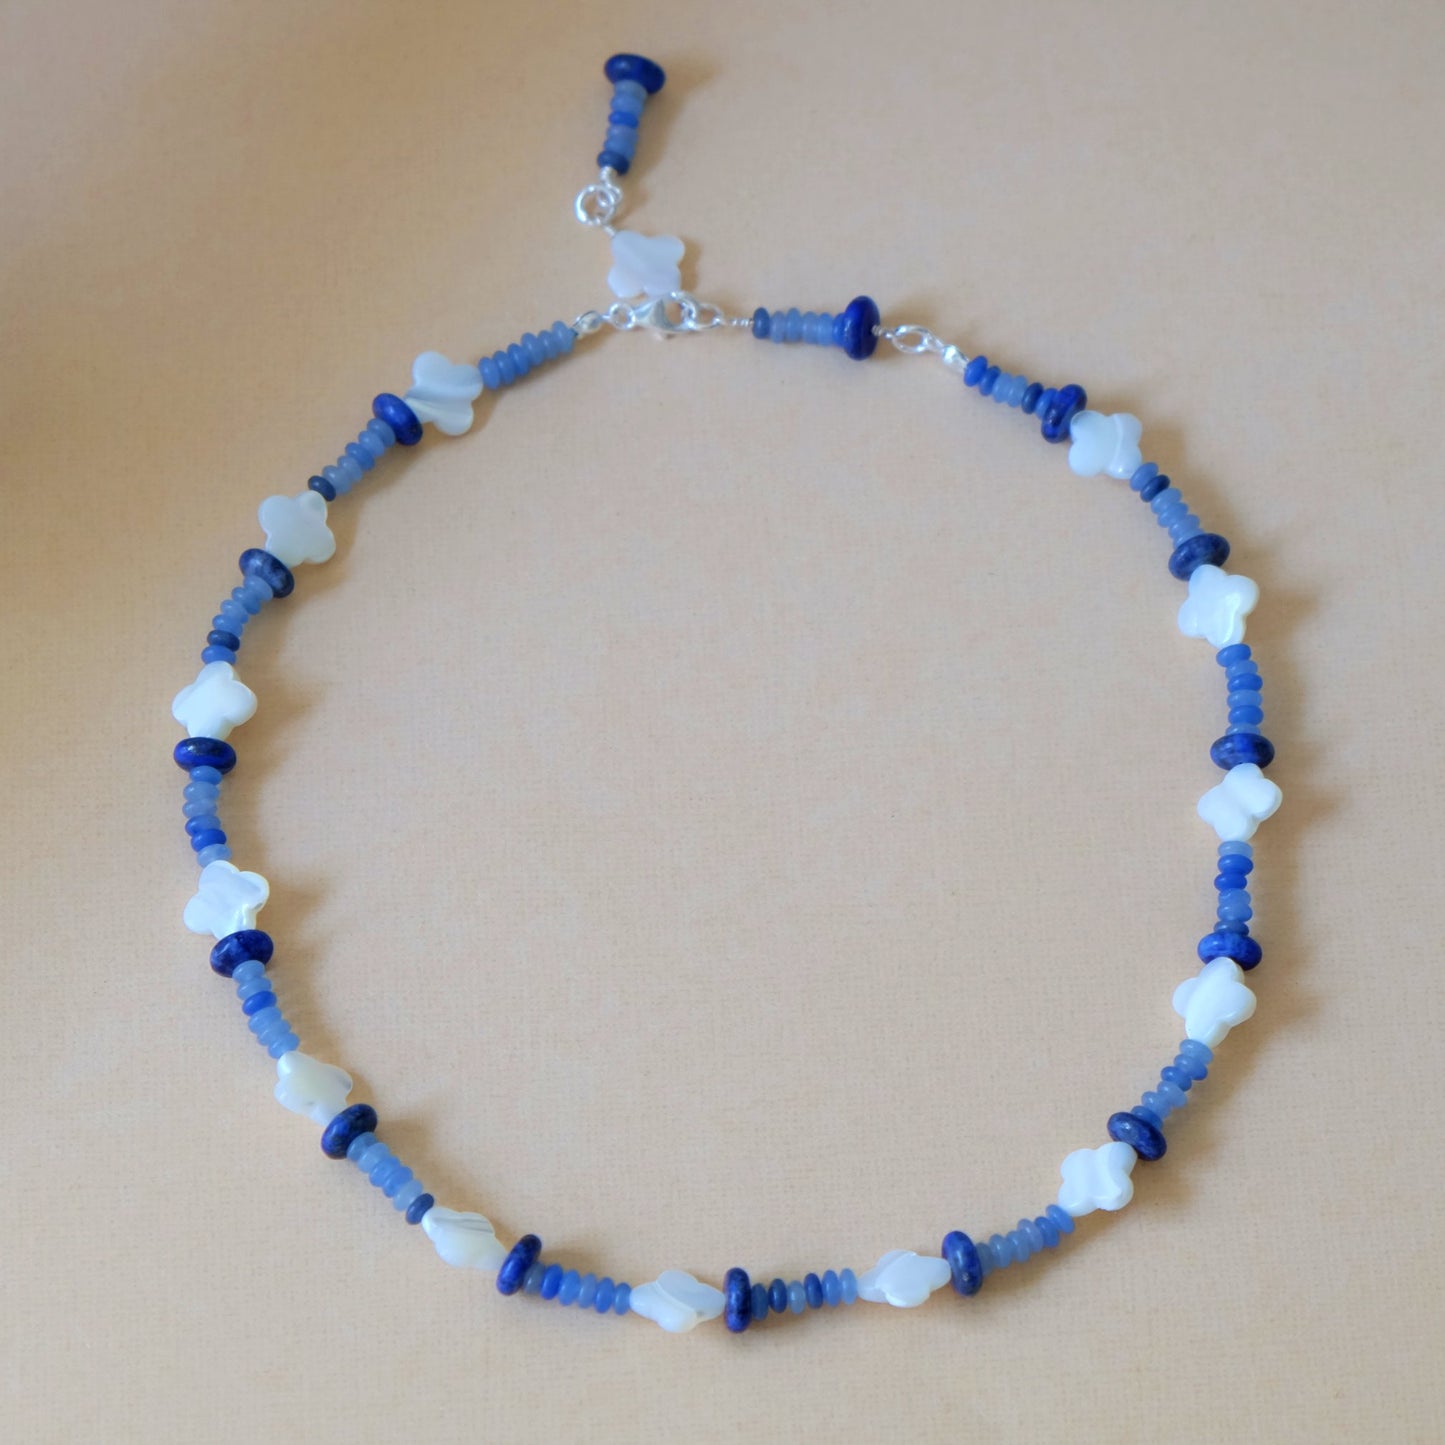 "Oceanic Moonlit Reflections" Necklace